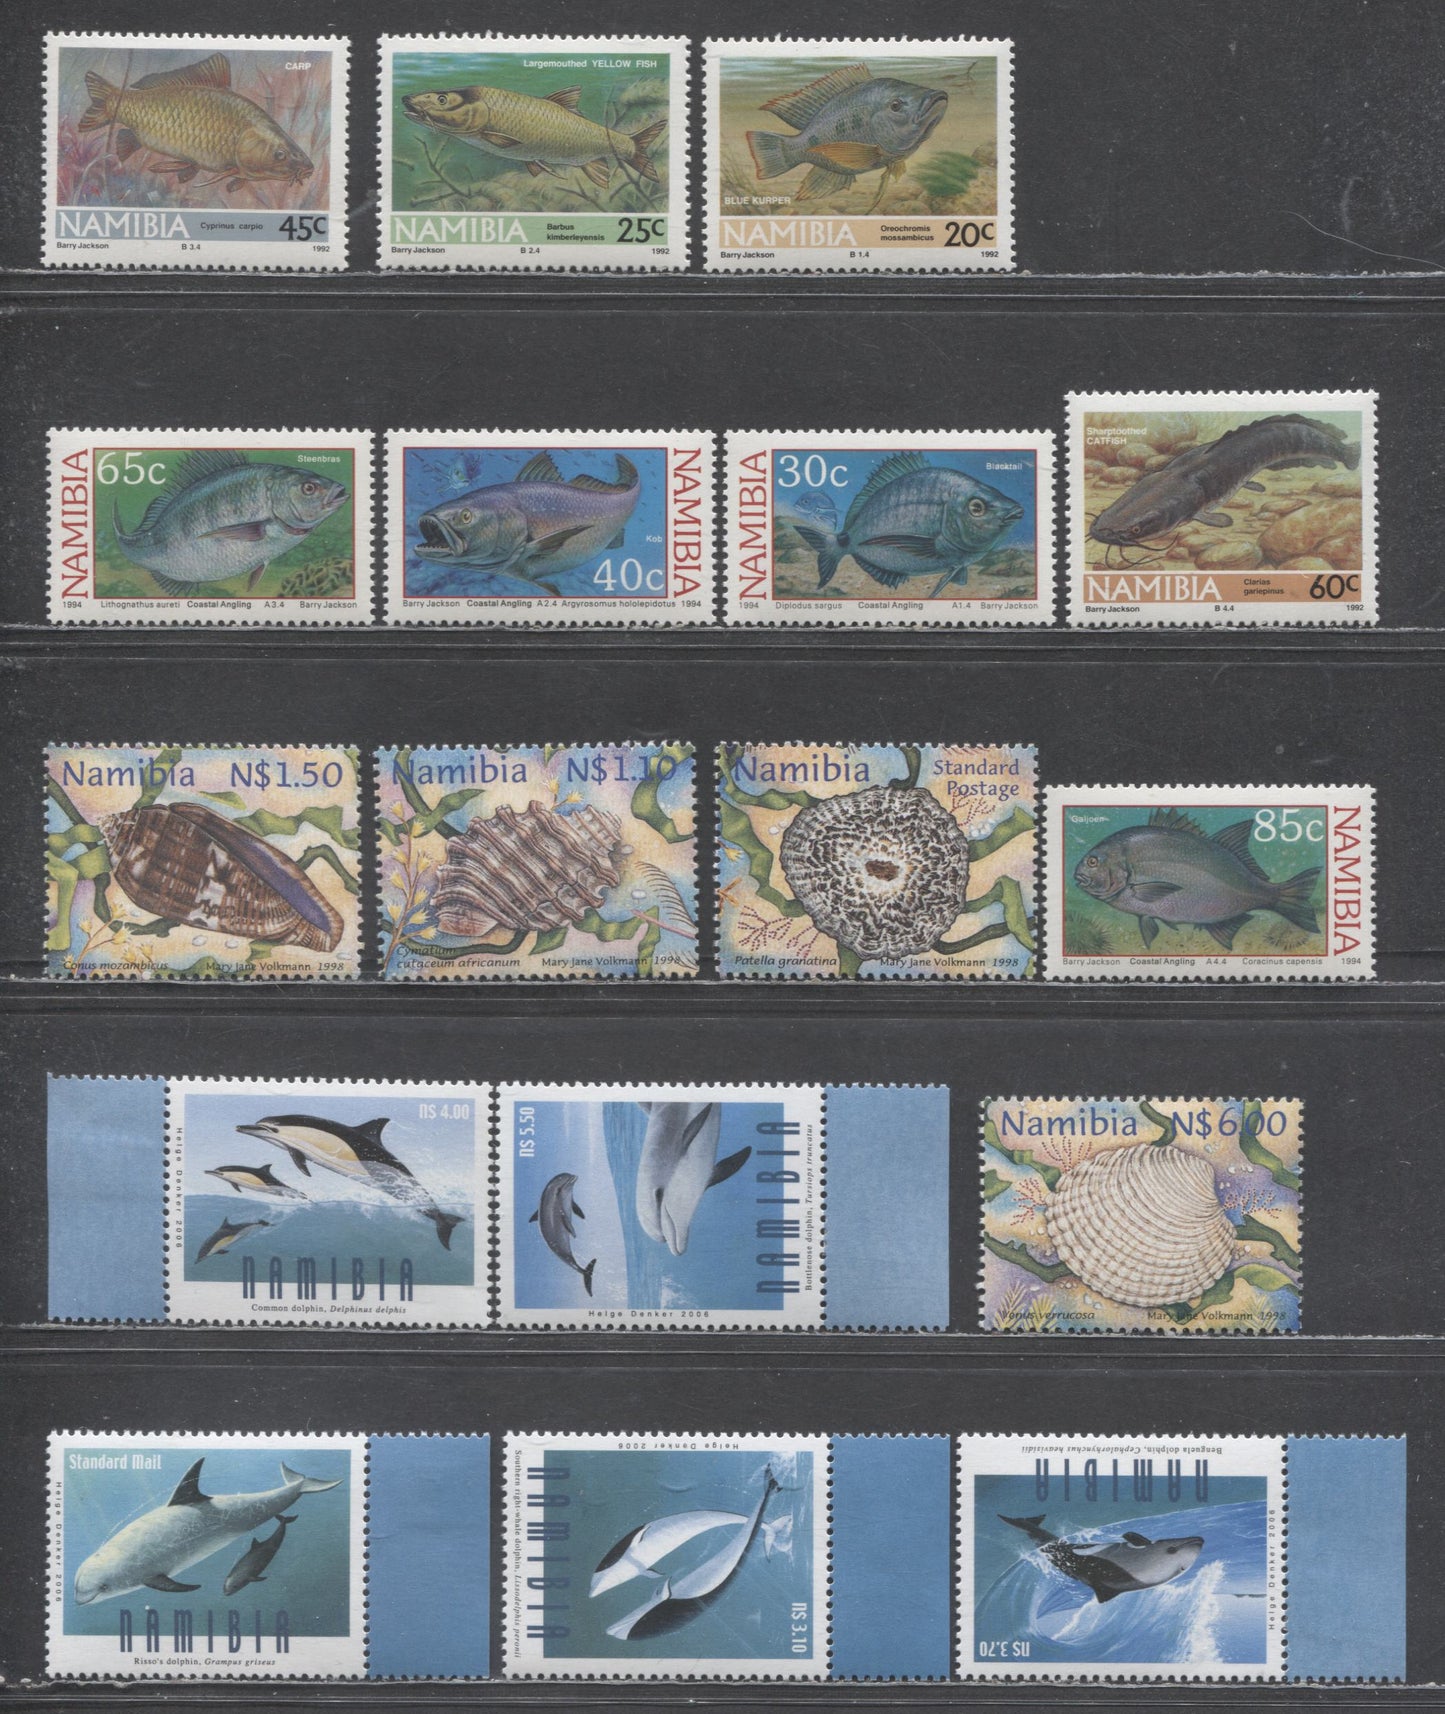 Lot 112 Namibia SC#710/919 1992-2006 Freshwater Fish - Dolphin Issues, 18 VFNH & OG Singles & Souvenir Sheets, Click on Listing to See ALL Pictures, 2017 Scott Cat. $18.15